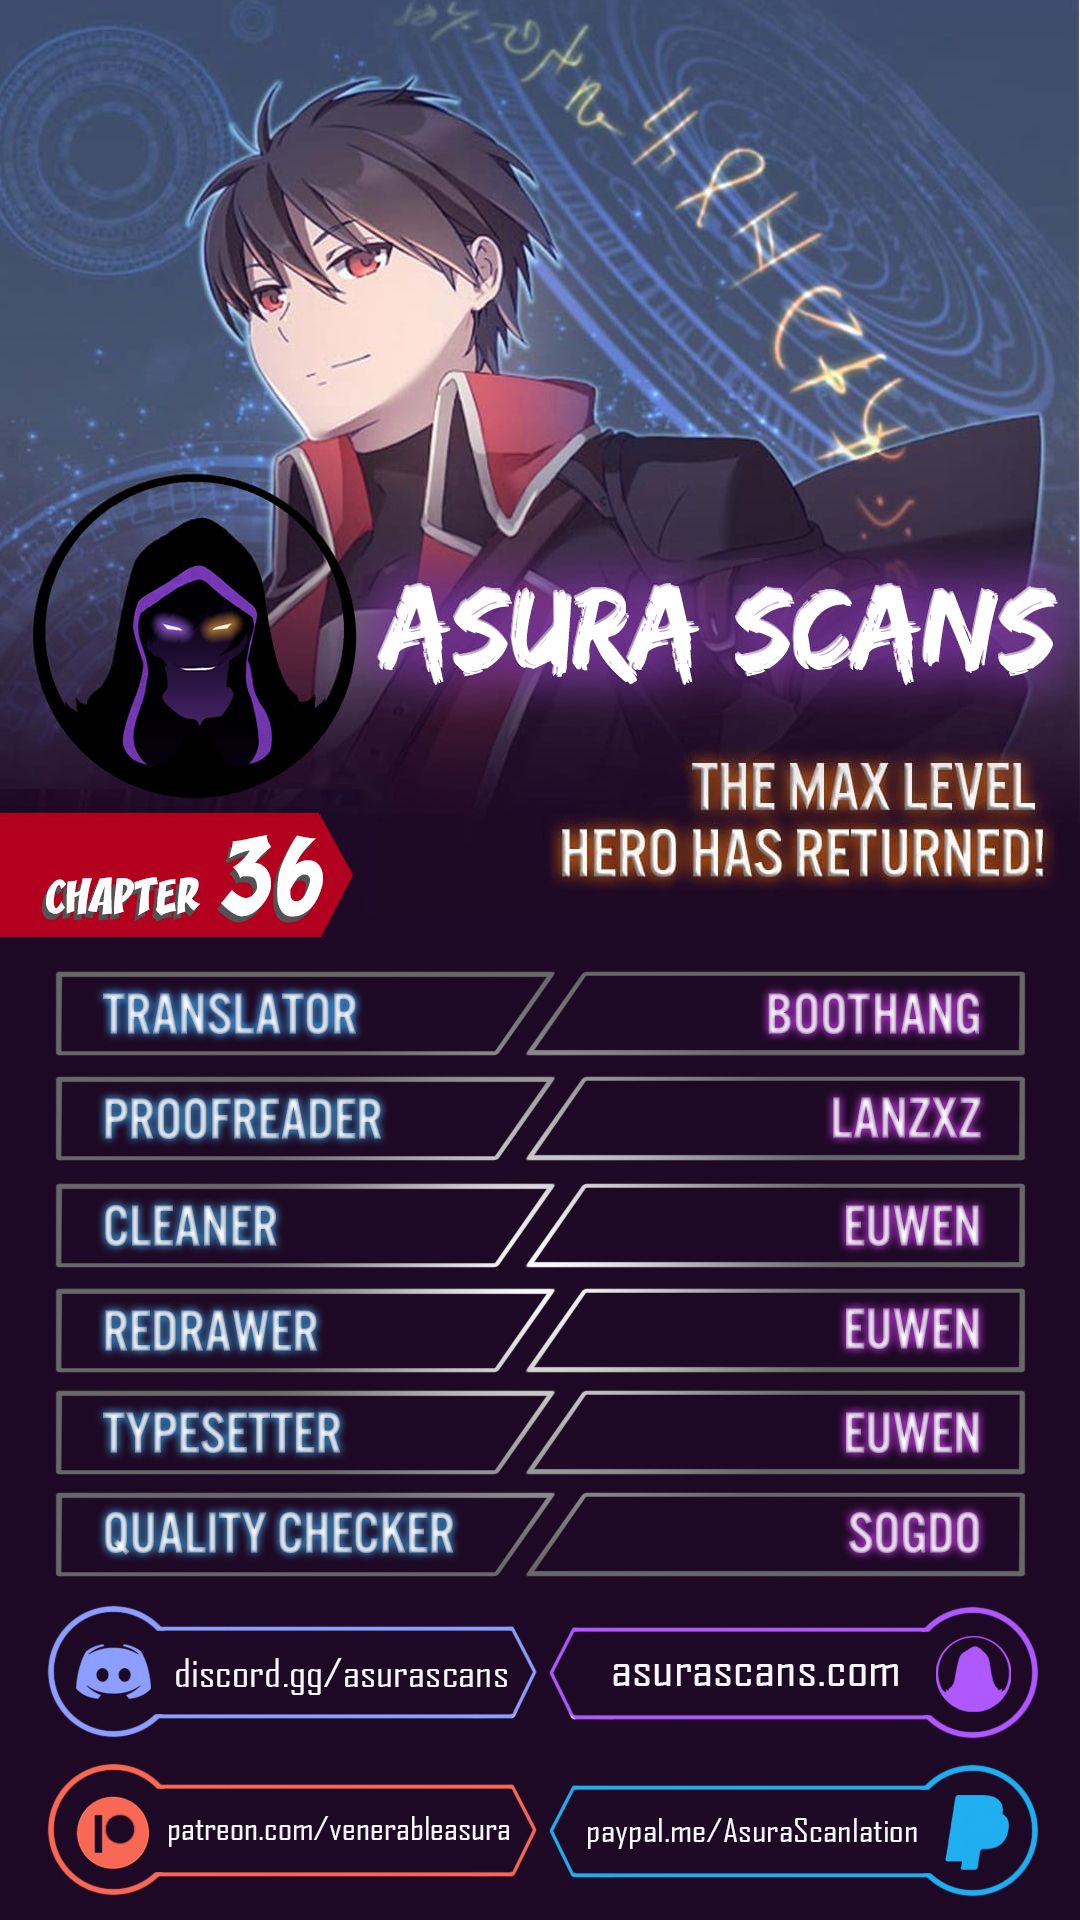 The MAX leveled hero will return! Chapter 36